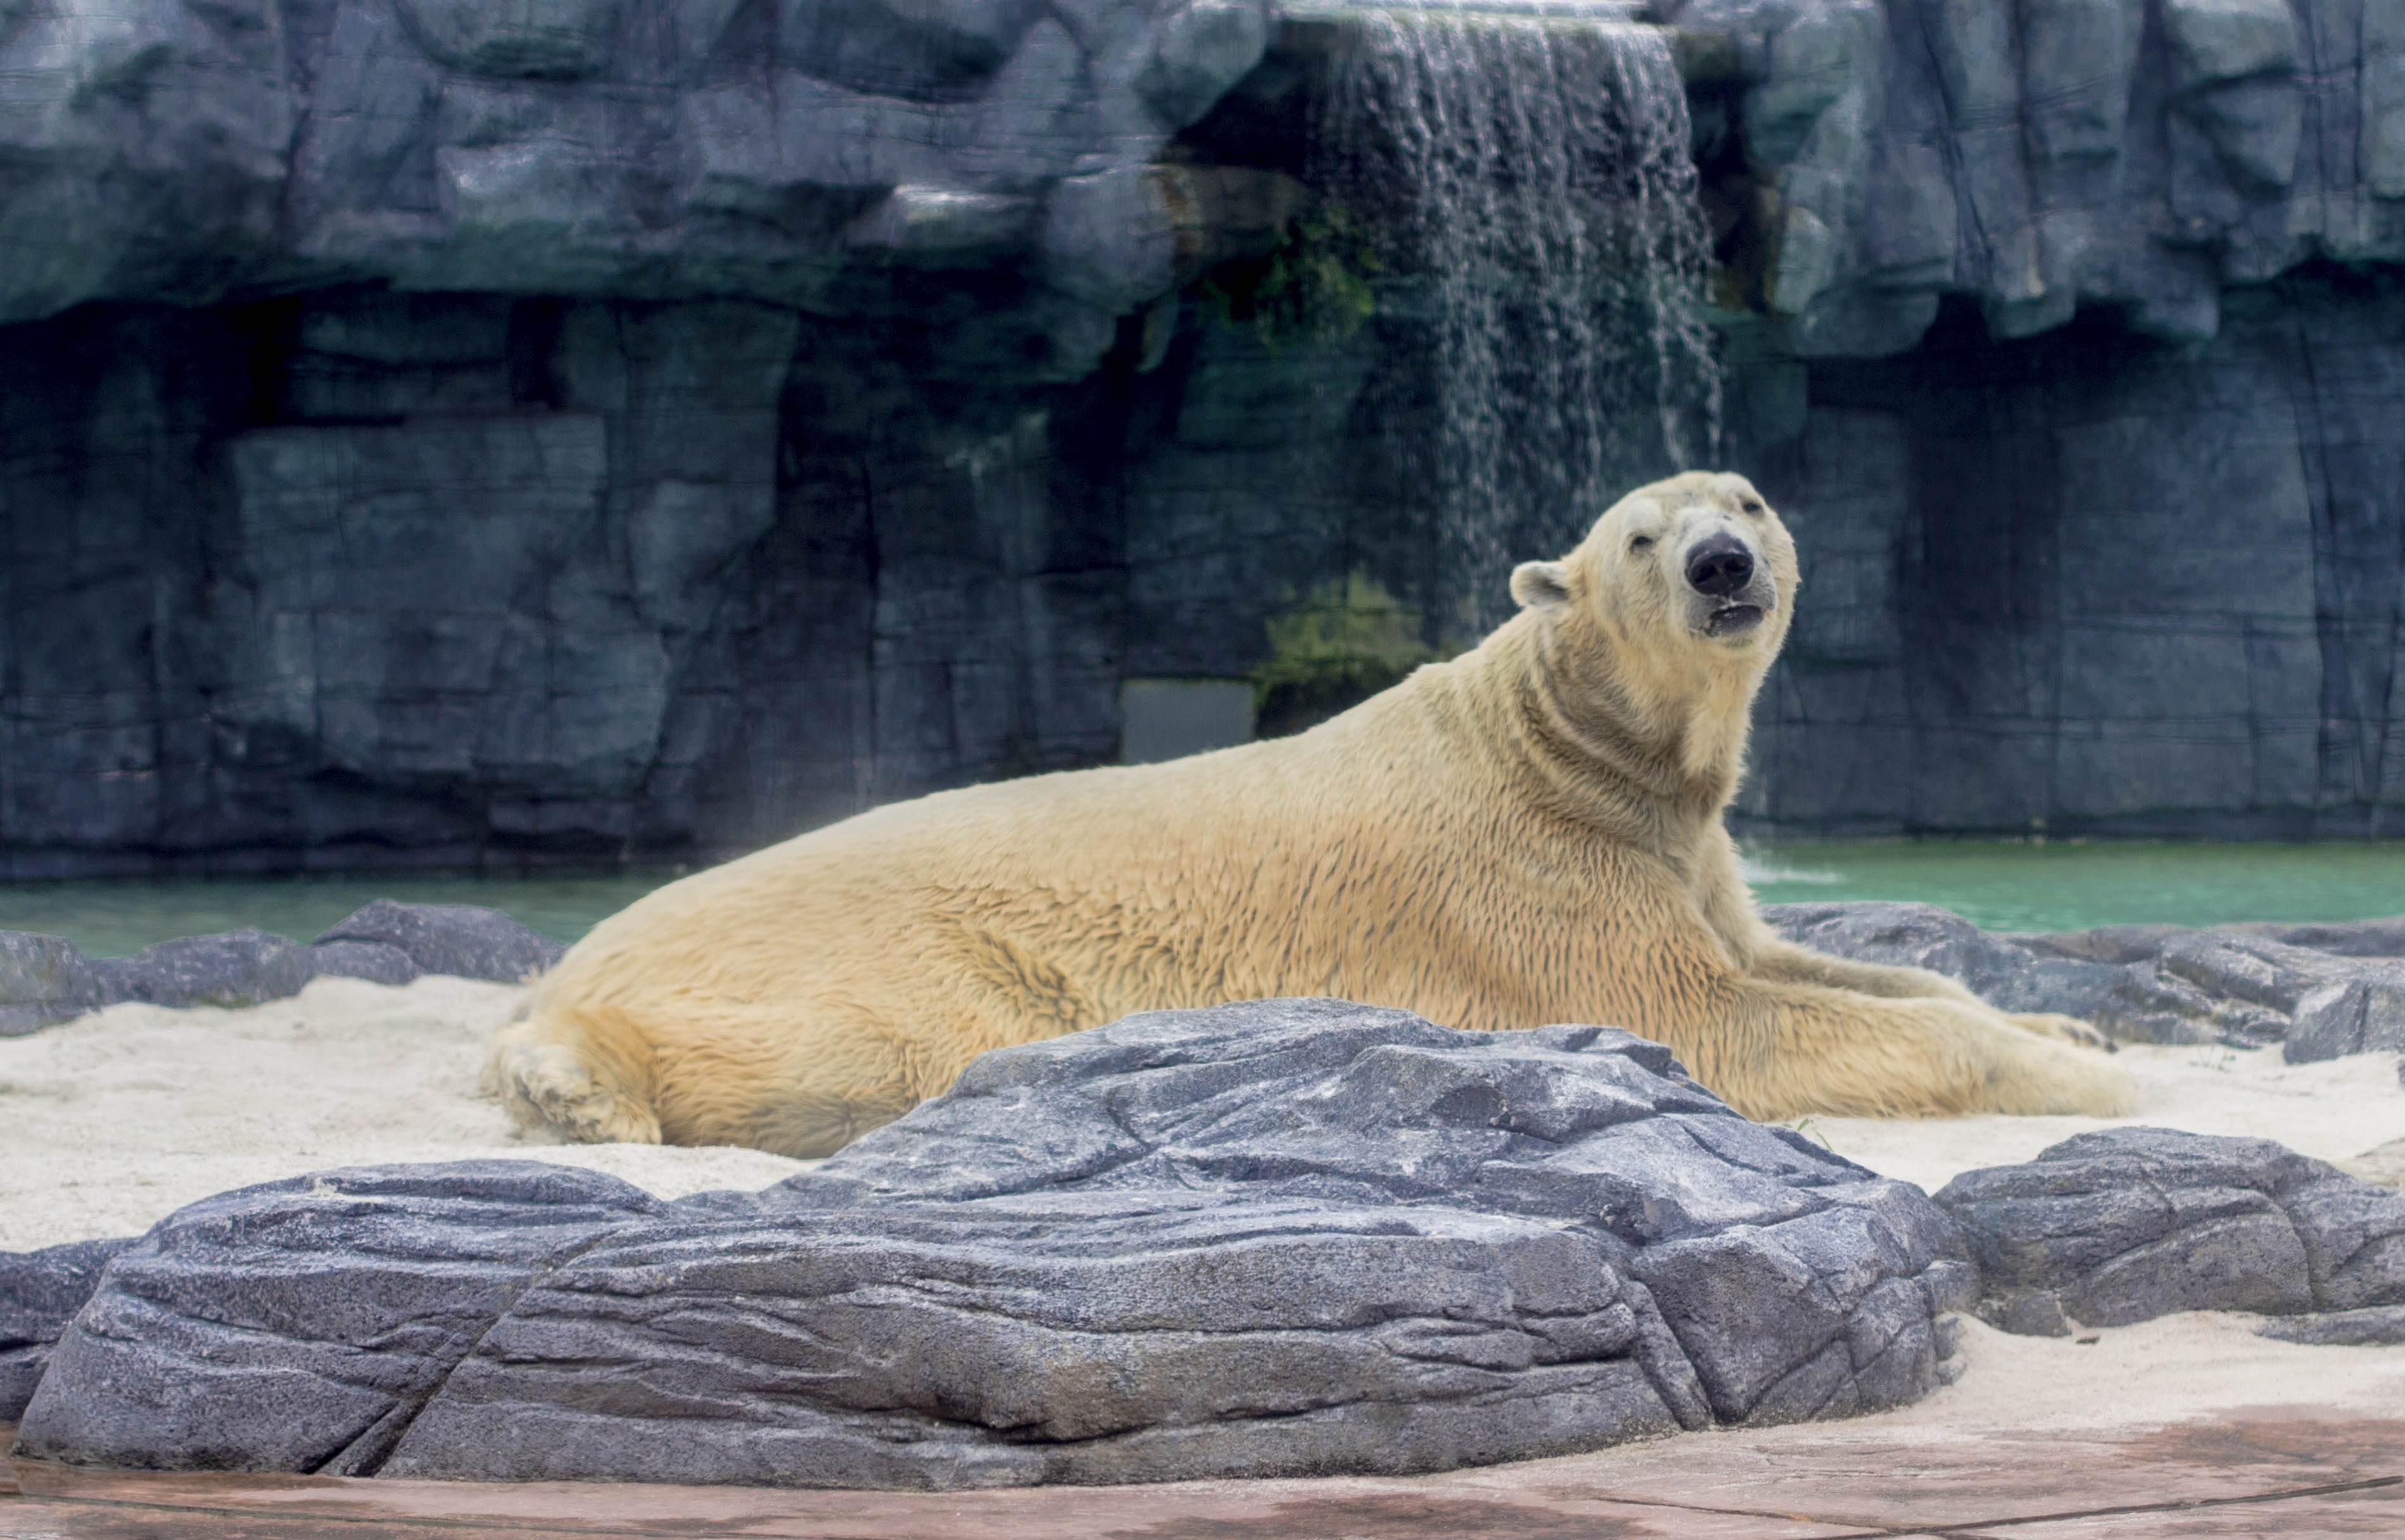 Activists blame insufficient, warm climate conditions for death of Polar bear in Mexican zoo